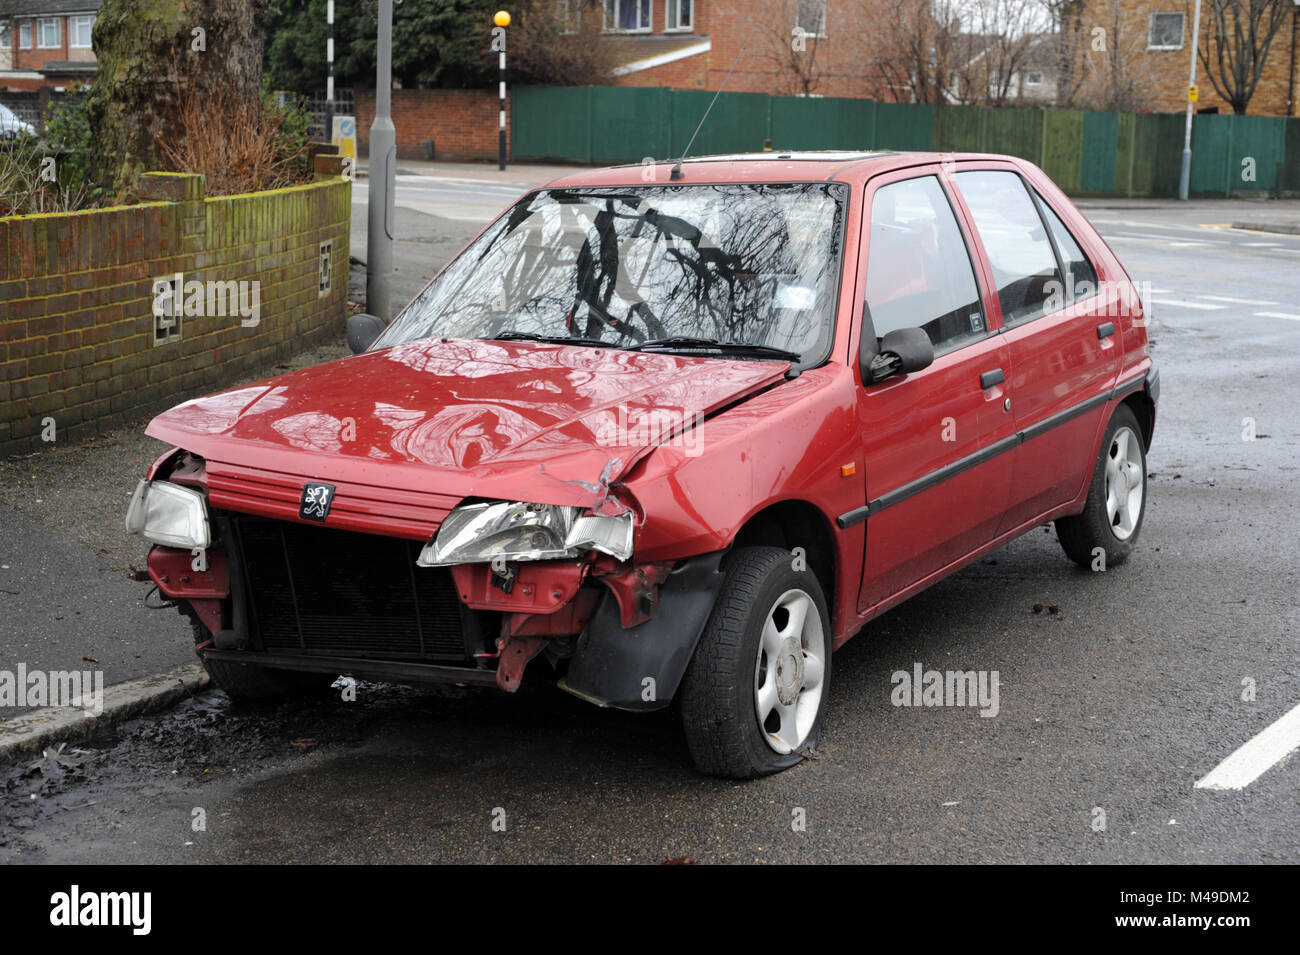 Abandoned damaged red Peugeot on a street in Hayes, Middlesex Stock Photo